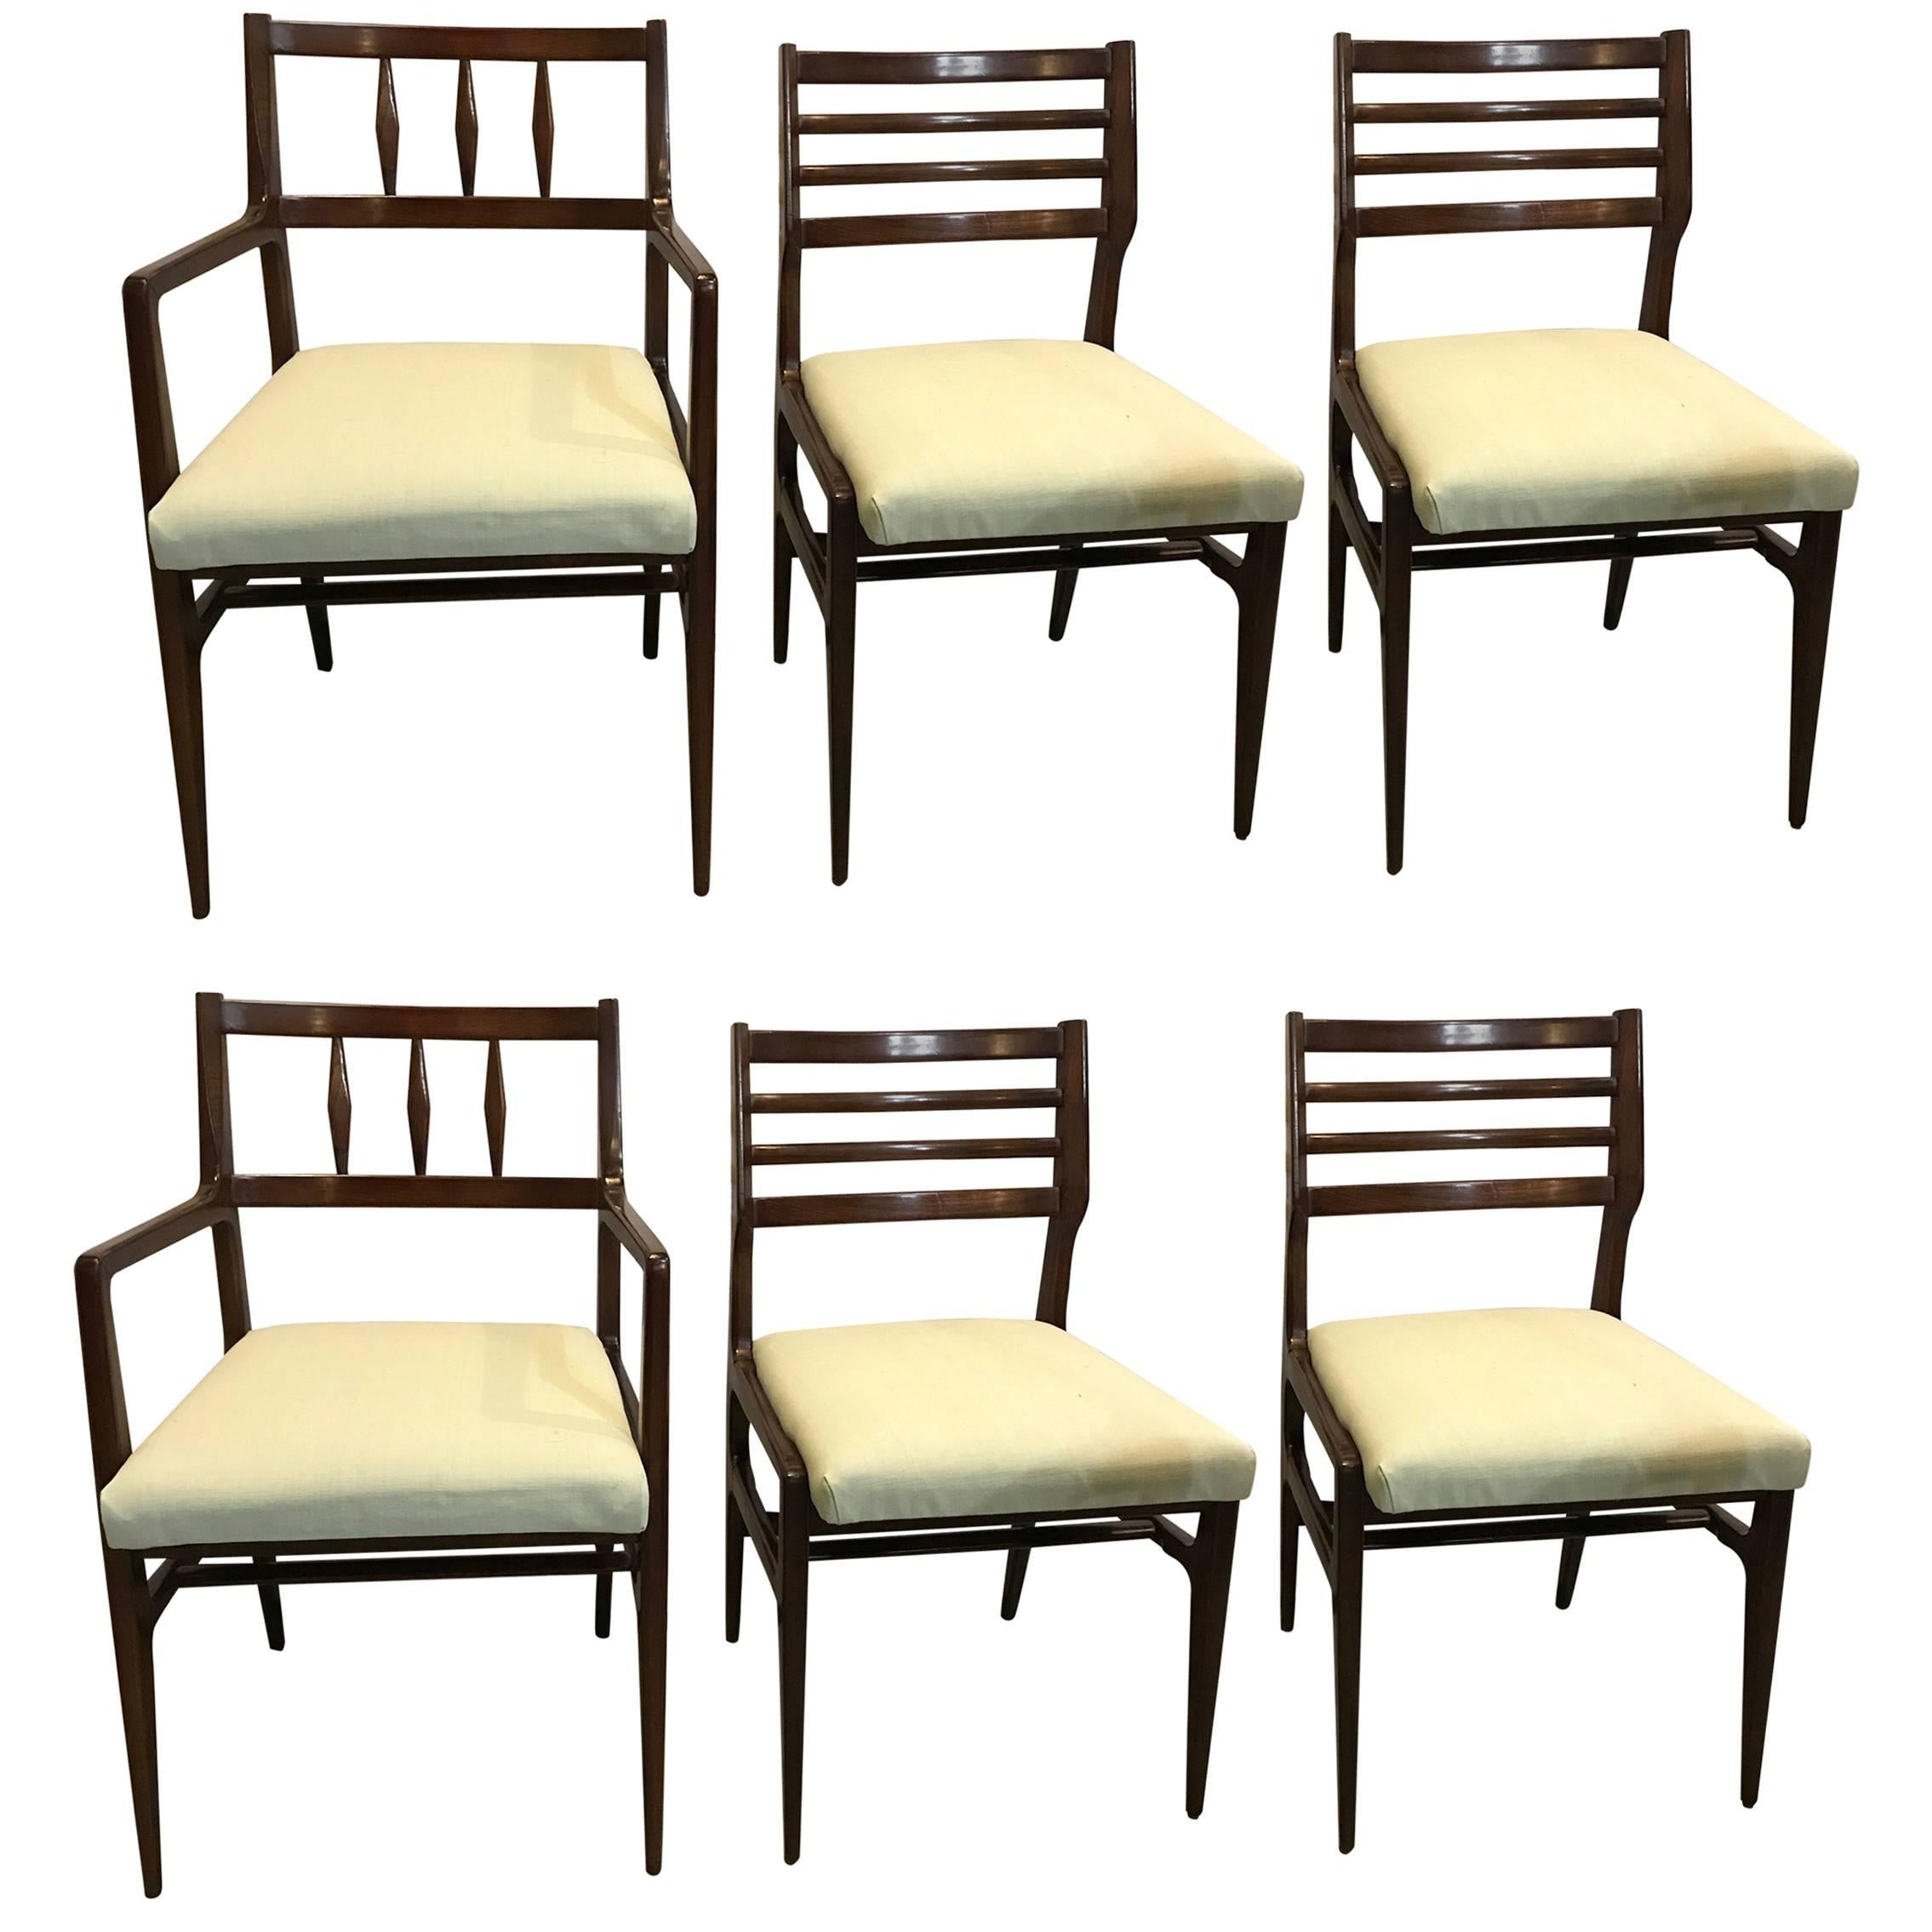 Set of Six Mid-Century Modern Rosewood Dining Chairs by R'way Furniture